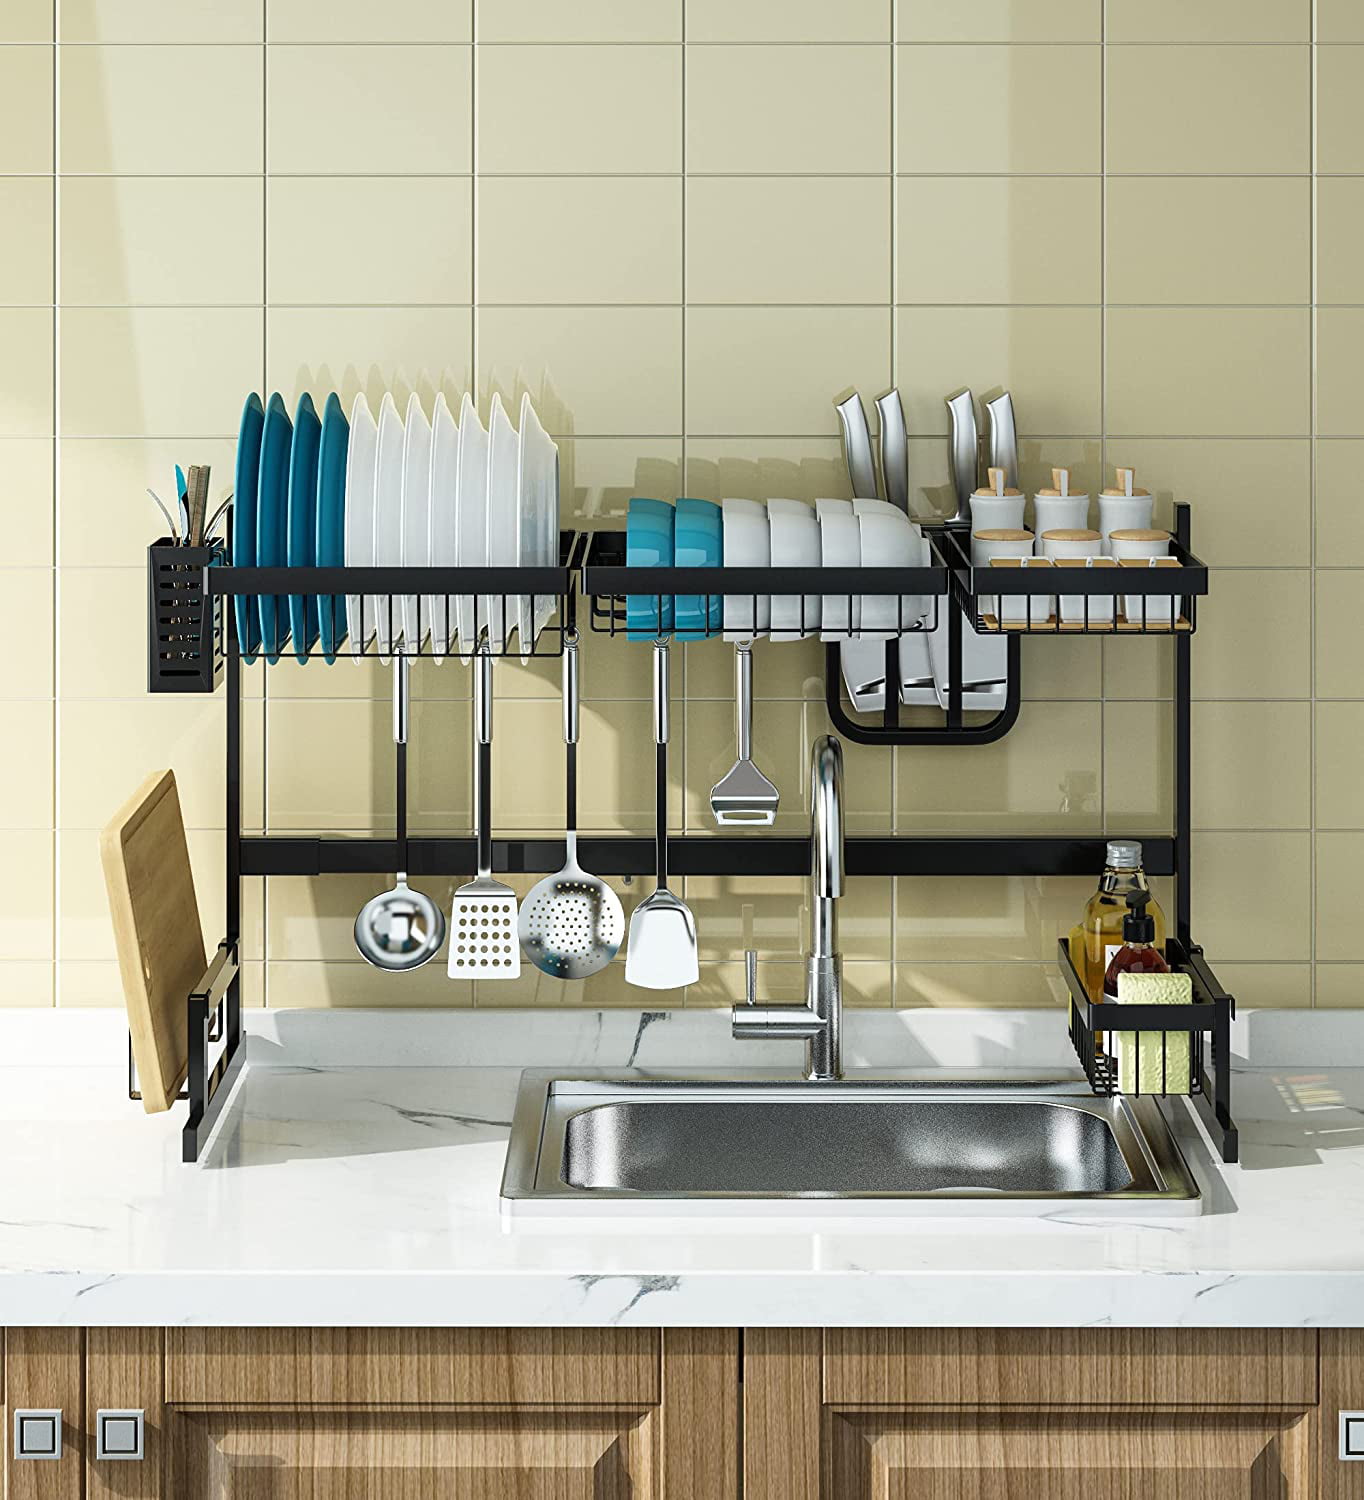 Over the Sink Dish Drainer Gray - Brightroom™